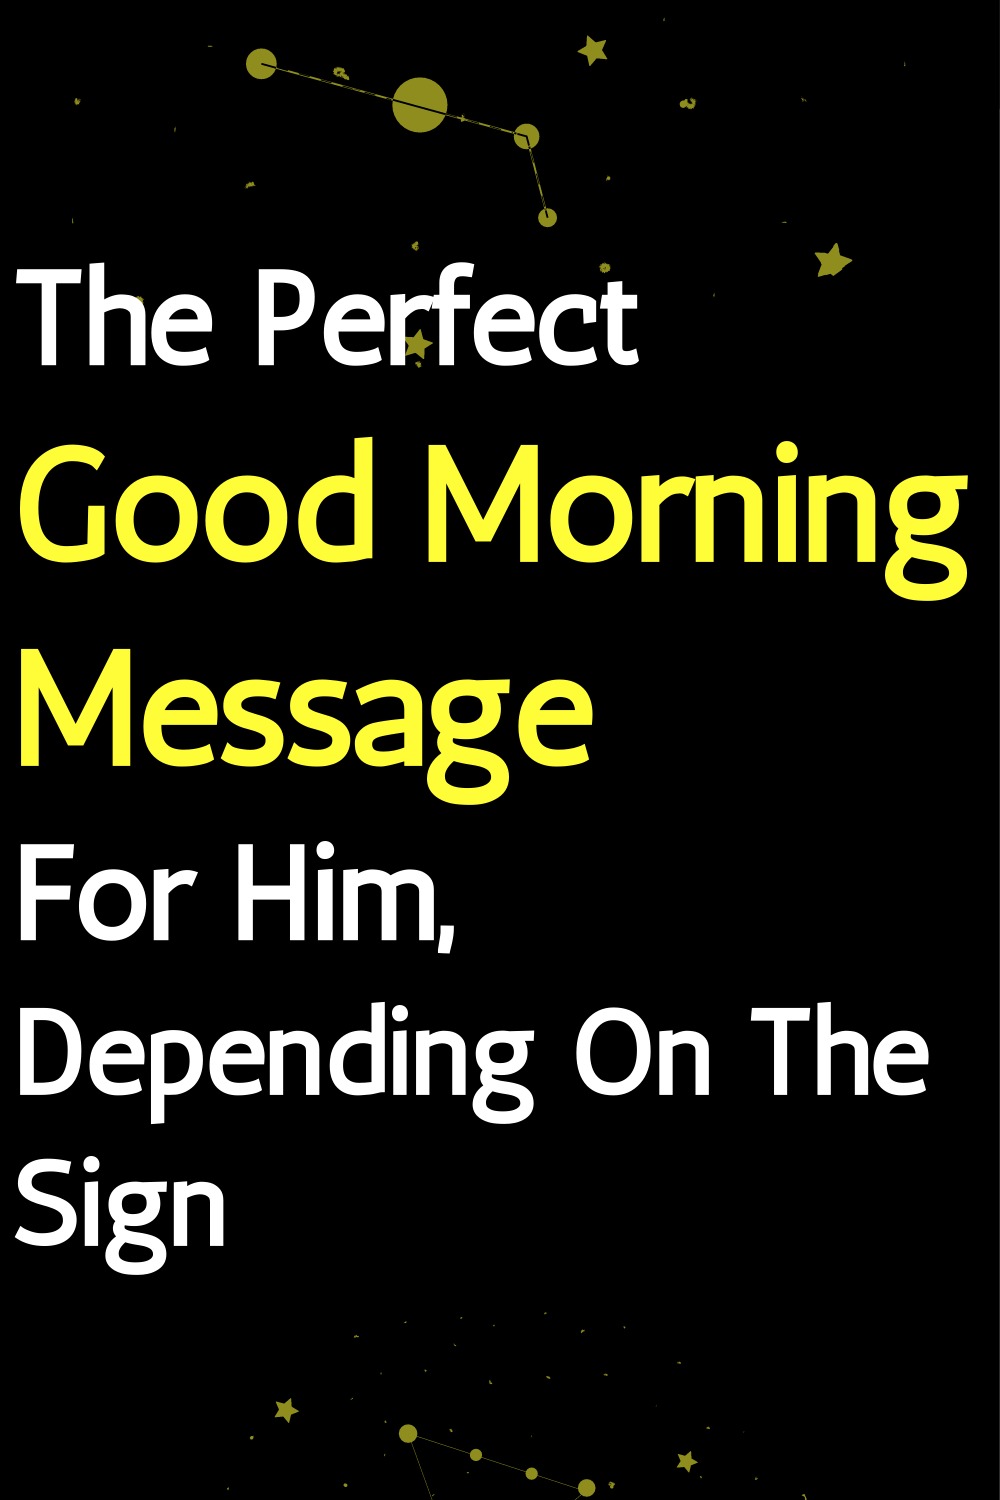 The Perfect Good Morning Message For Him, Depending On The Sign